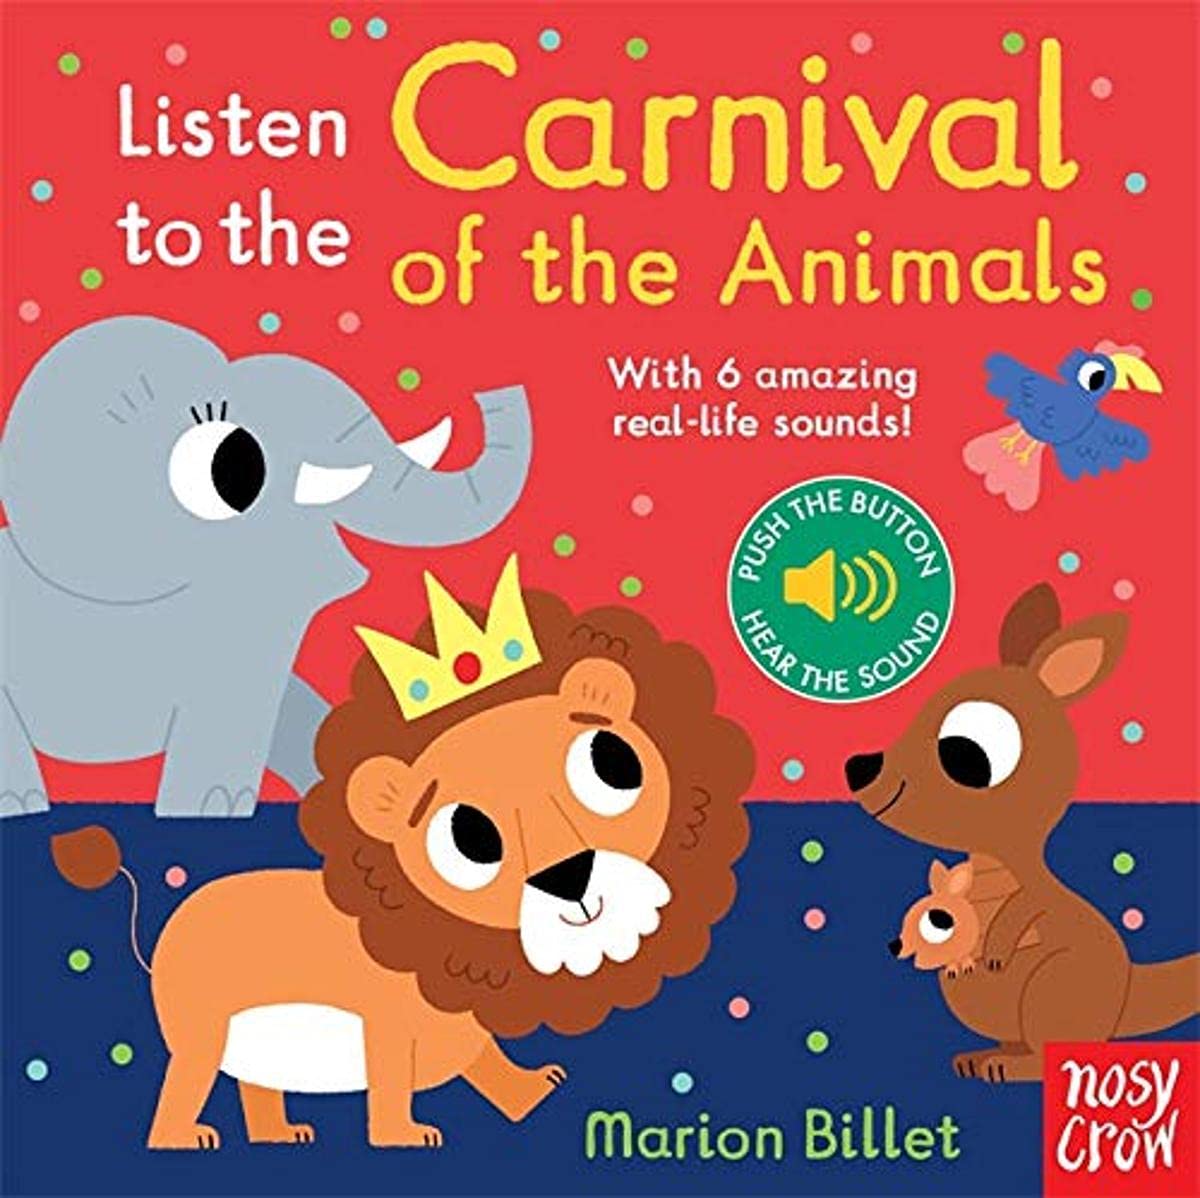 Listen to the Carnival of the Animals (Board Book)